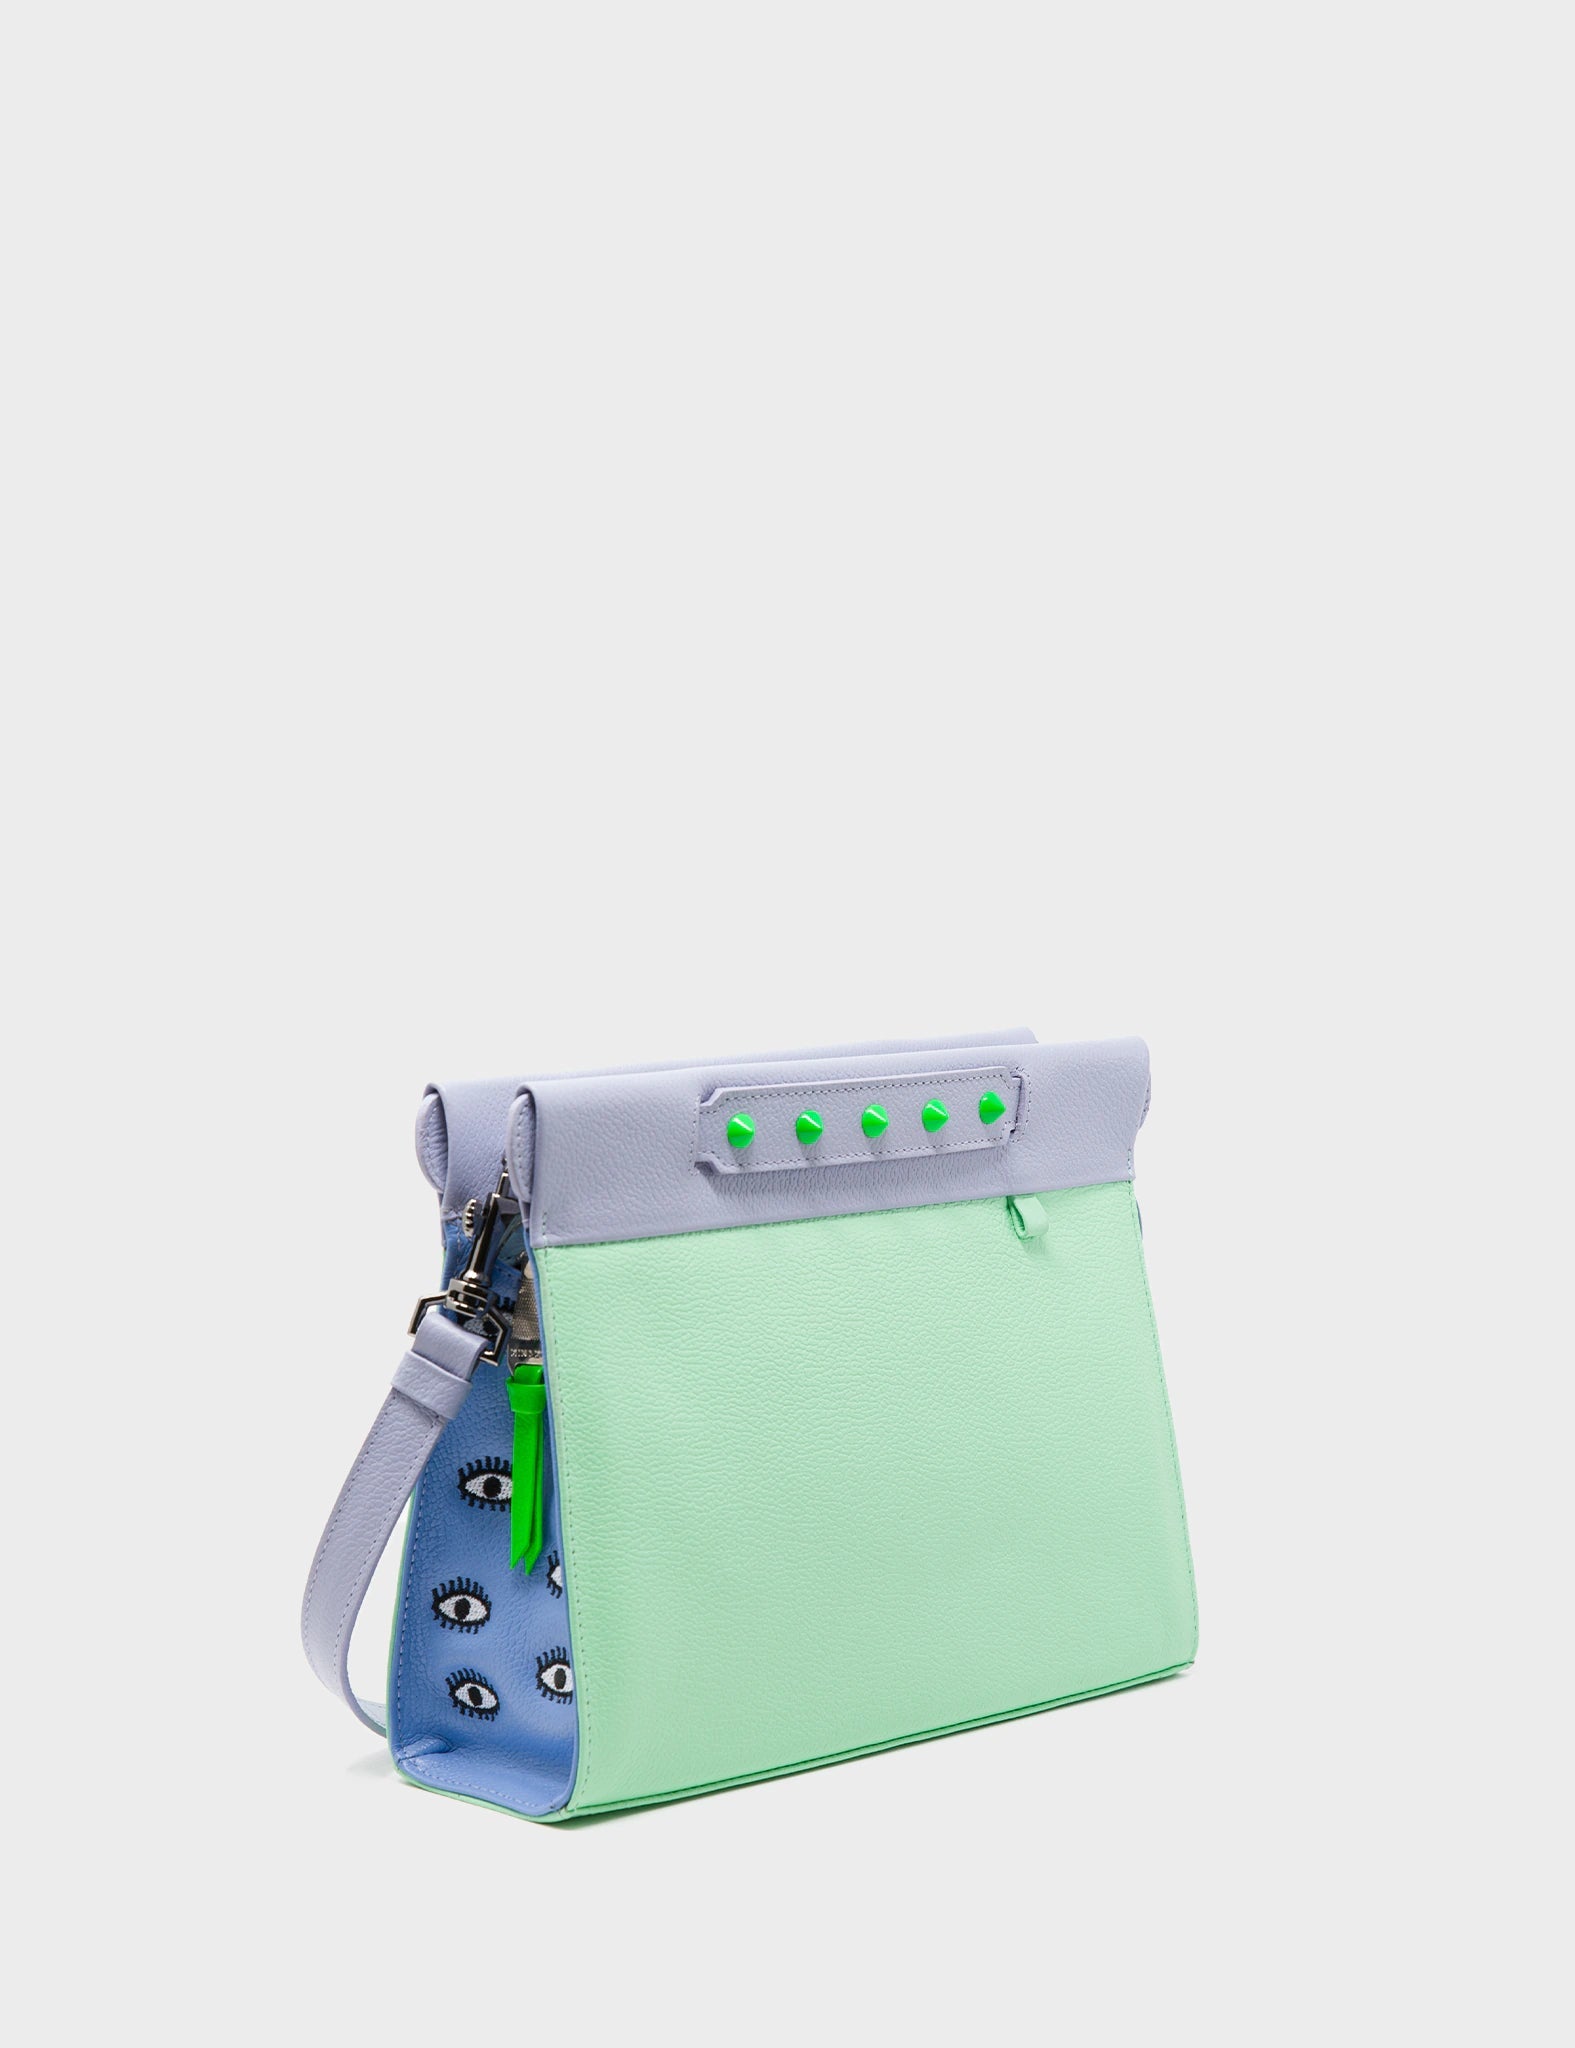 Crossbody Ash green Leather Bag - Eyes Embroidery